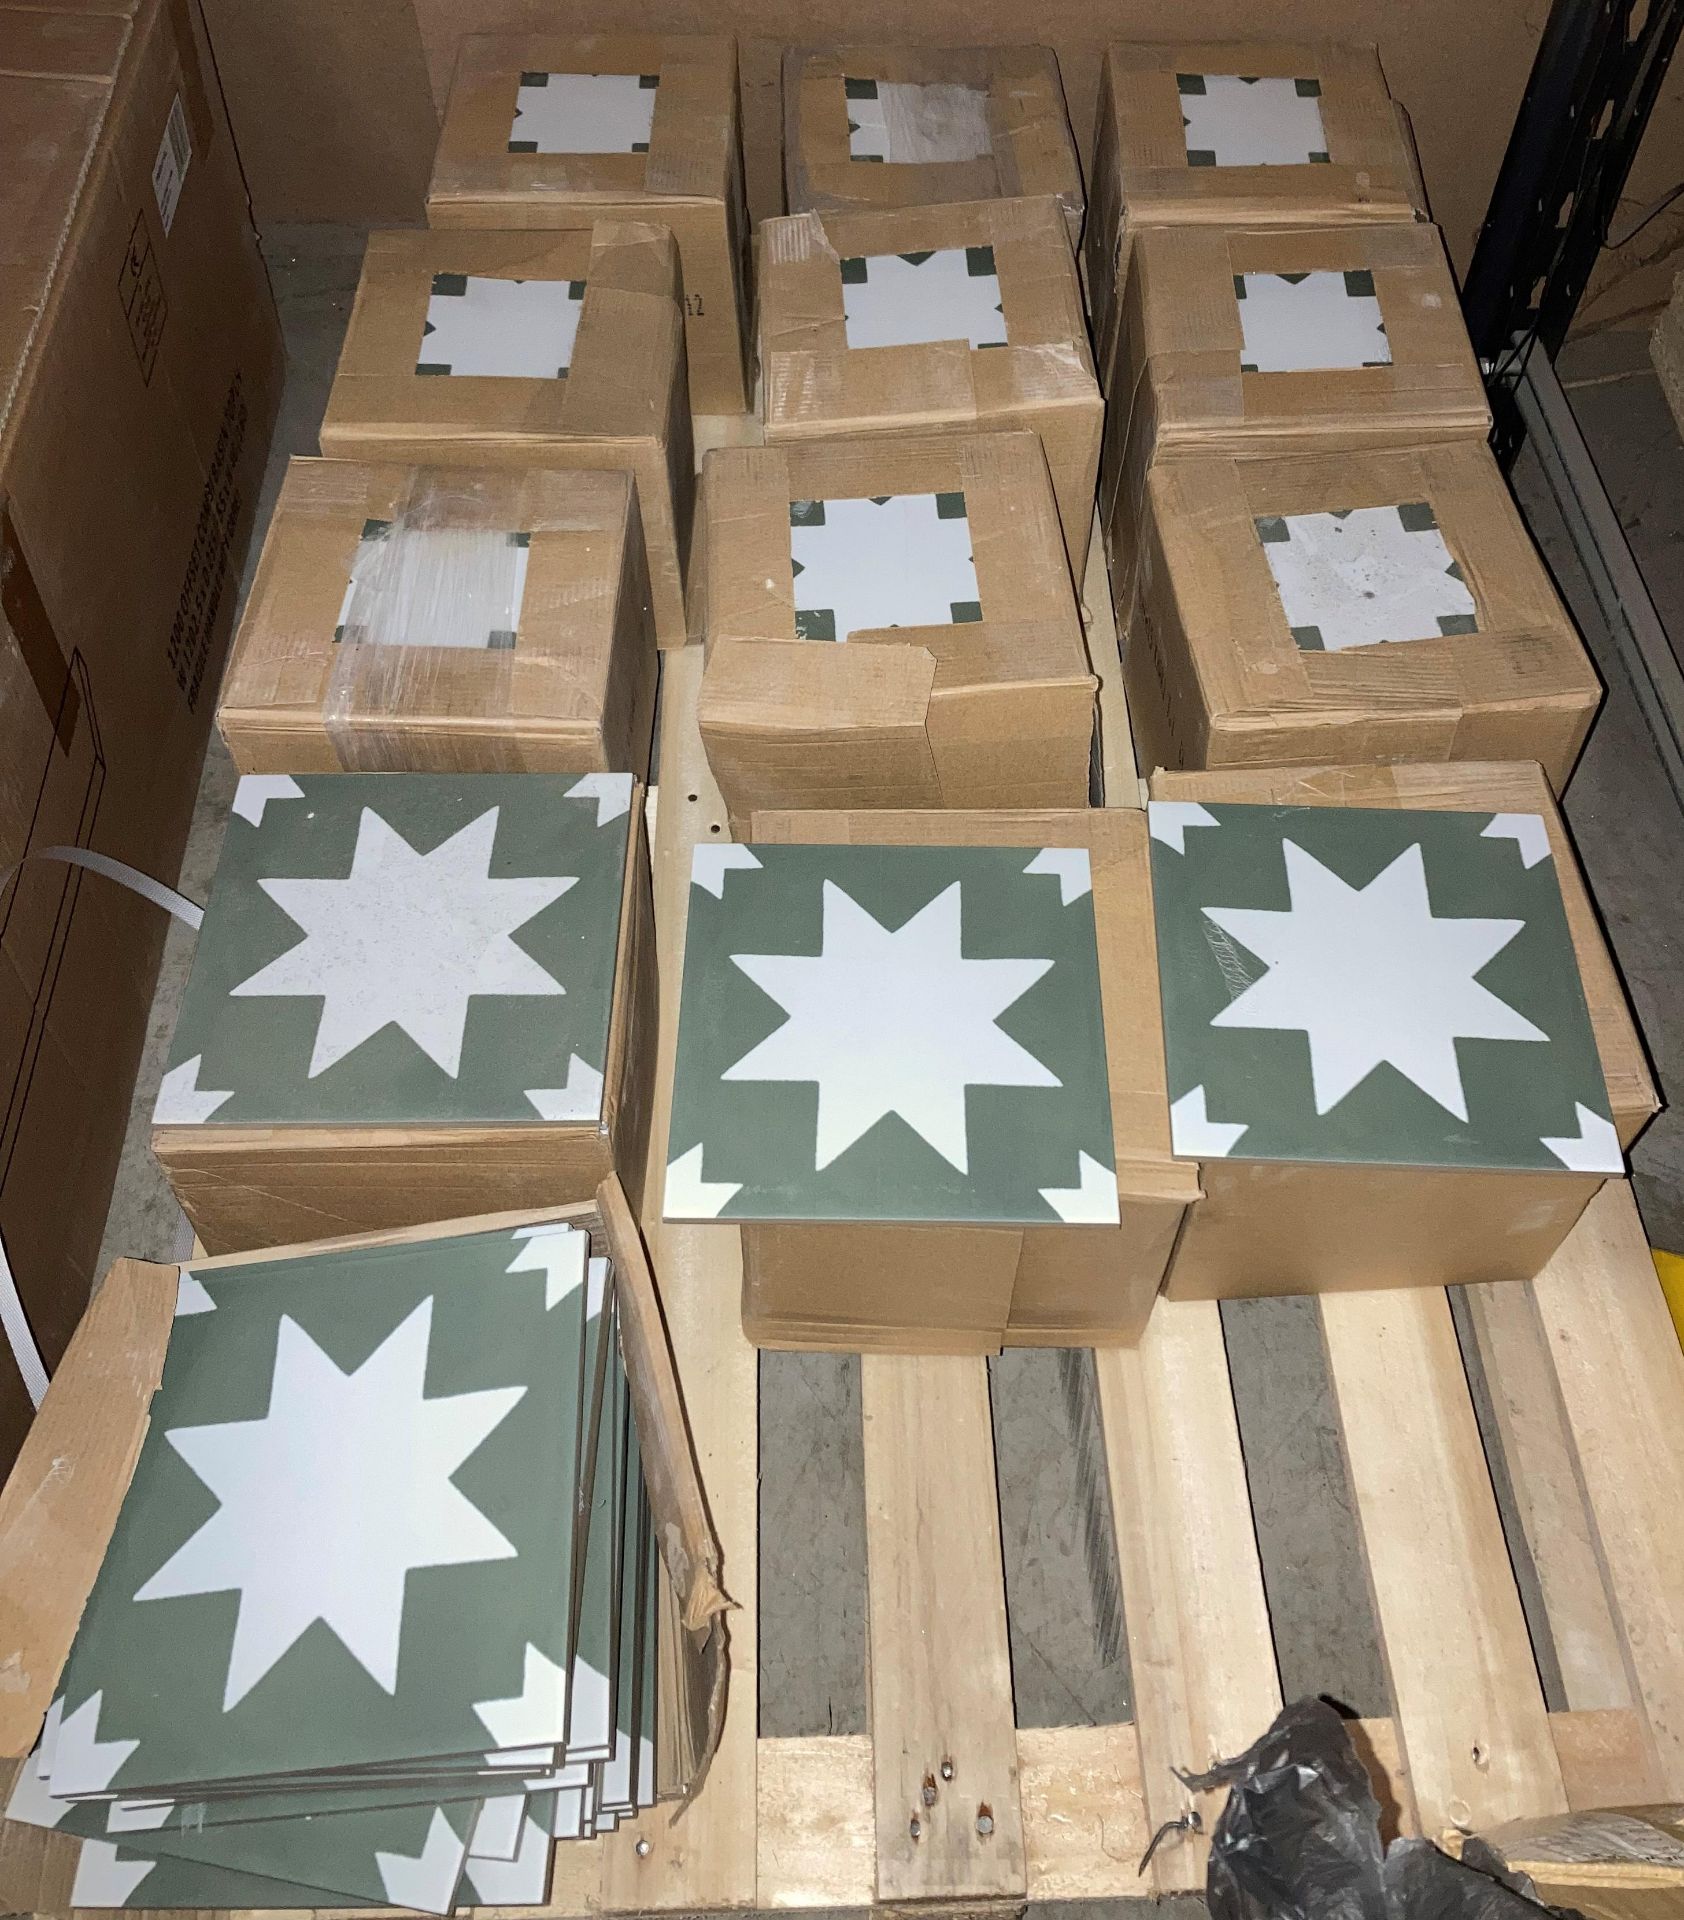 13 x packs of 25 20cm star design ceramic wall tiles in green and off white (saleroom location: QL